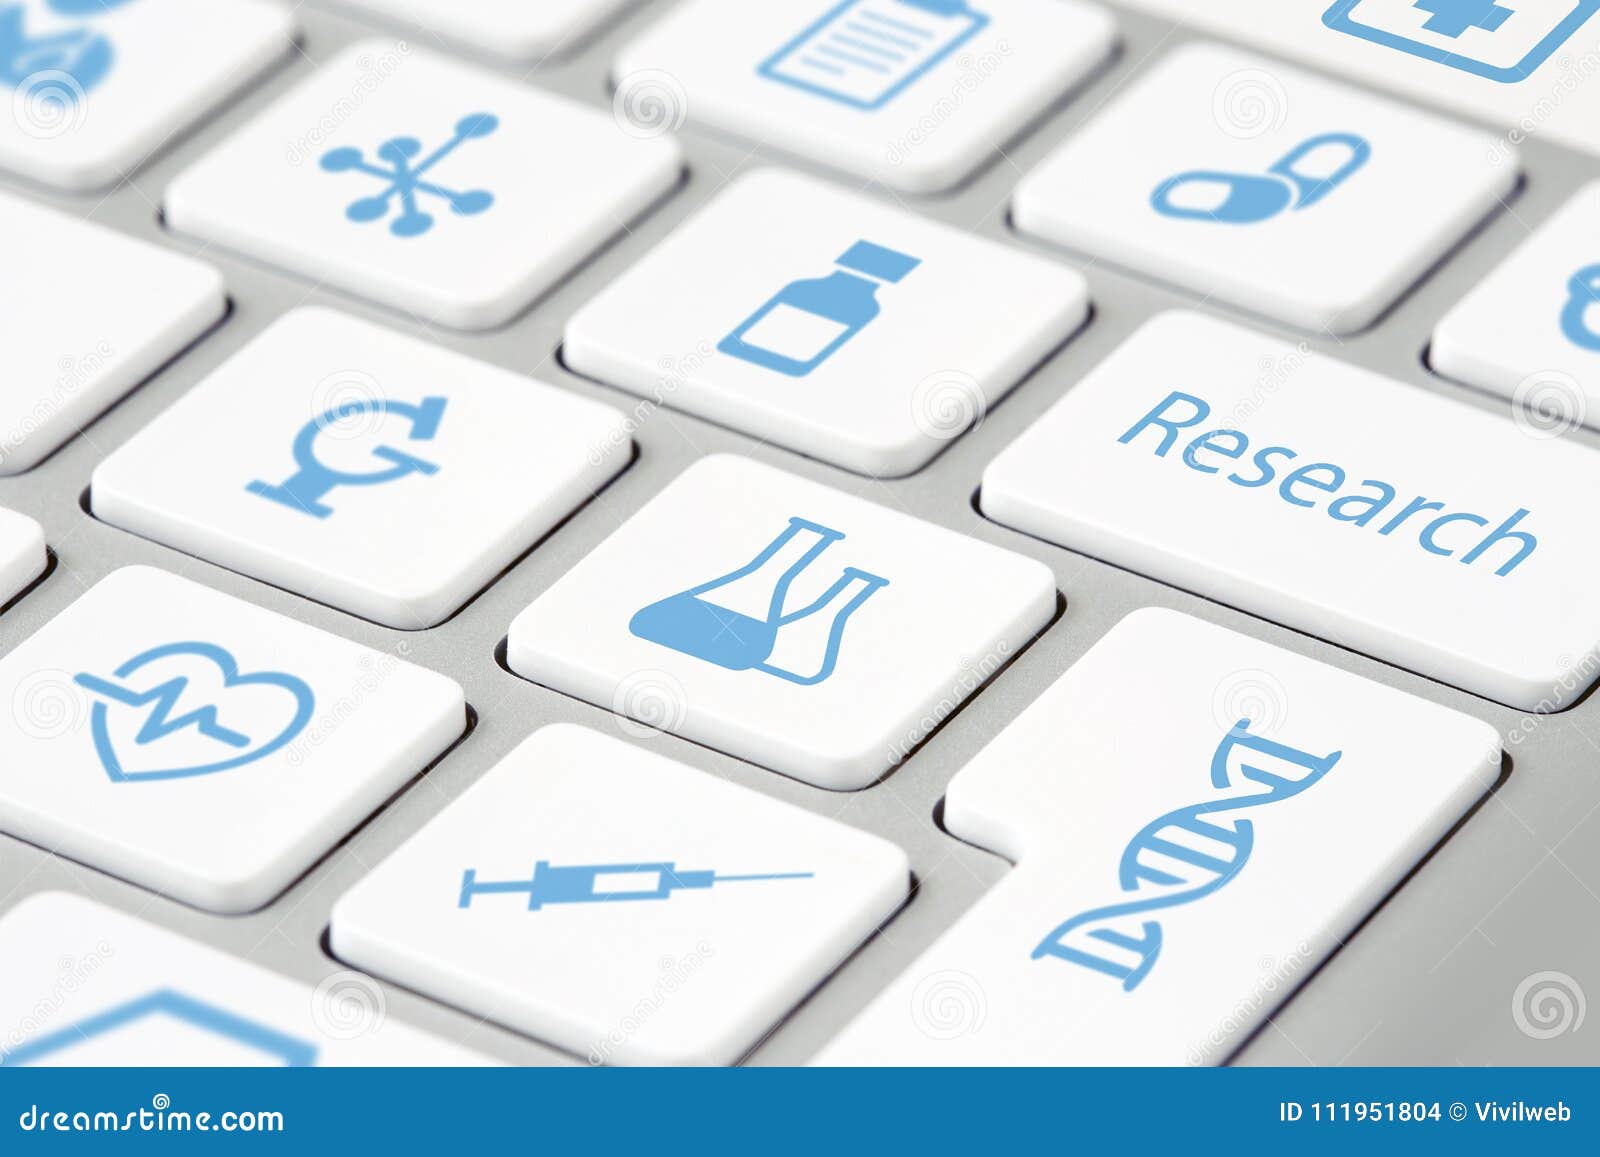 medical research icons on keyboard buttons